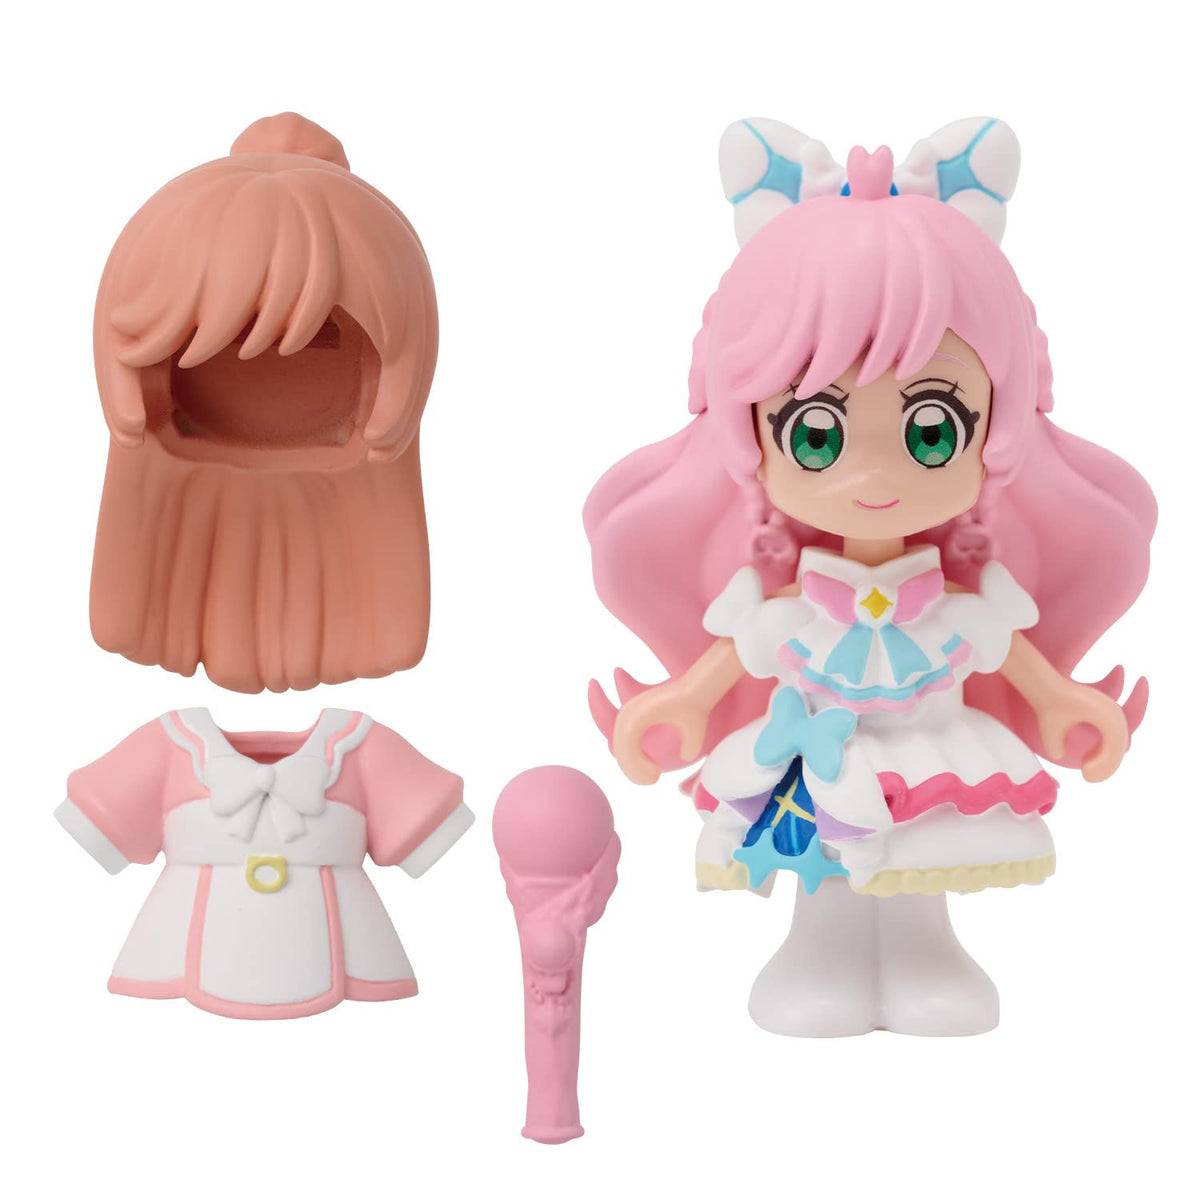 Bandai Expanding Sky Pretty Cure Precure Pre Code Doll Cure Prism Act — Akibashipping 1803